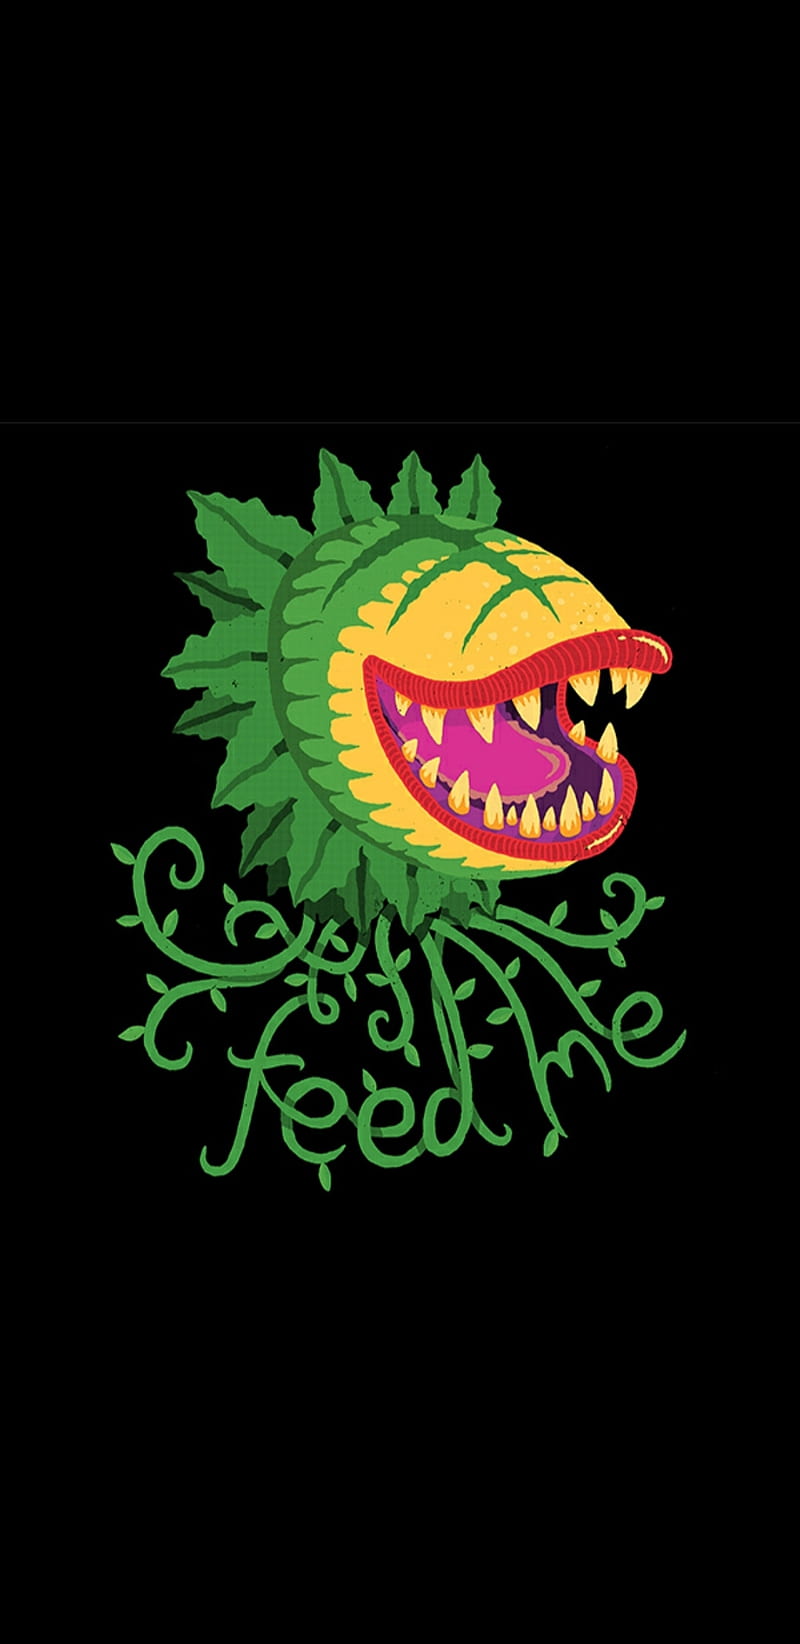 Shop of horrors, feed me seymore, horror, little shop of horrors, HD phone wallpaper